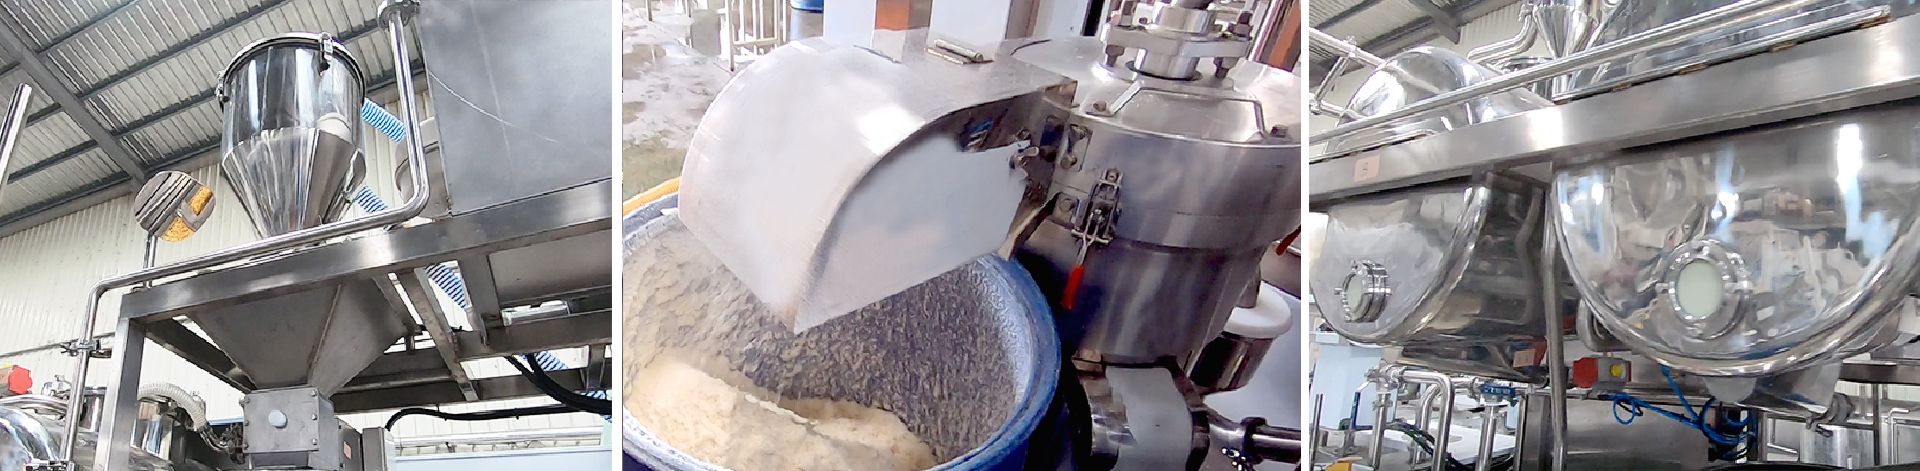 Grinding And Separating Machine, grinding of soybean, soy bean grinder, soy grinder, soya bean grinder, soya bean grinder and separator, soya grinder, soya grinder machine, soya grinder with separator, soybean machine, soybean milk grinding machine, soybean stone grinder, tofu grinder, tofu grinder machine, food equipment